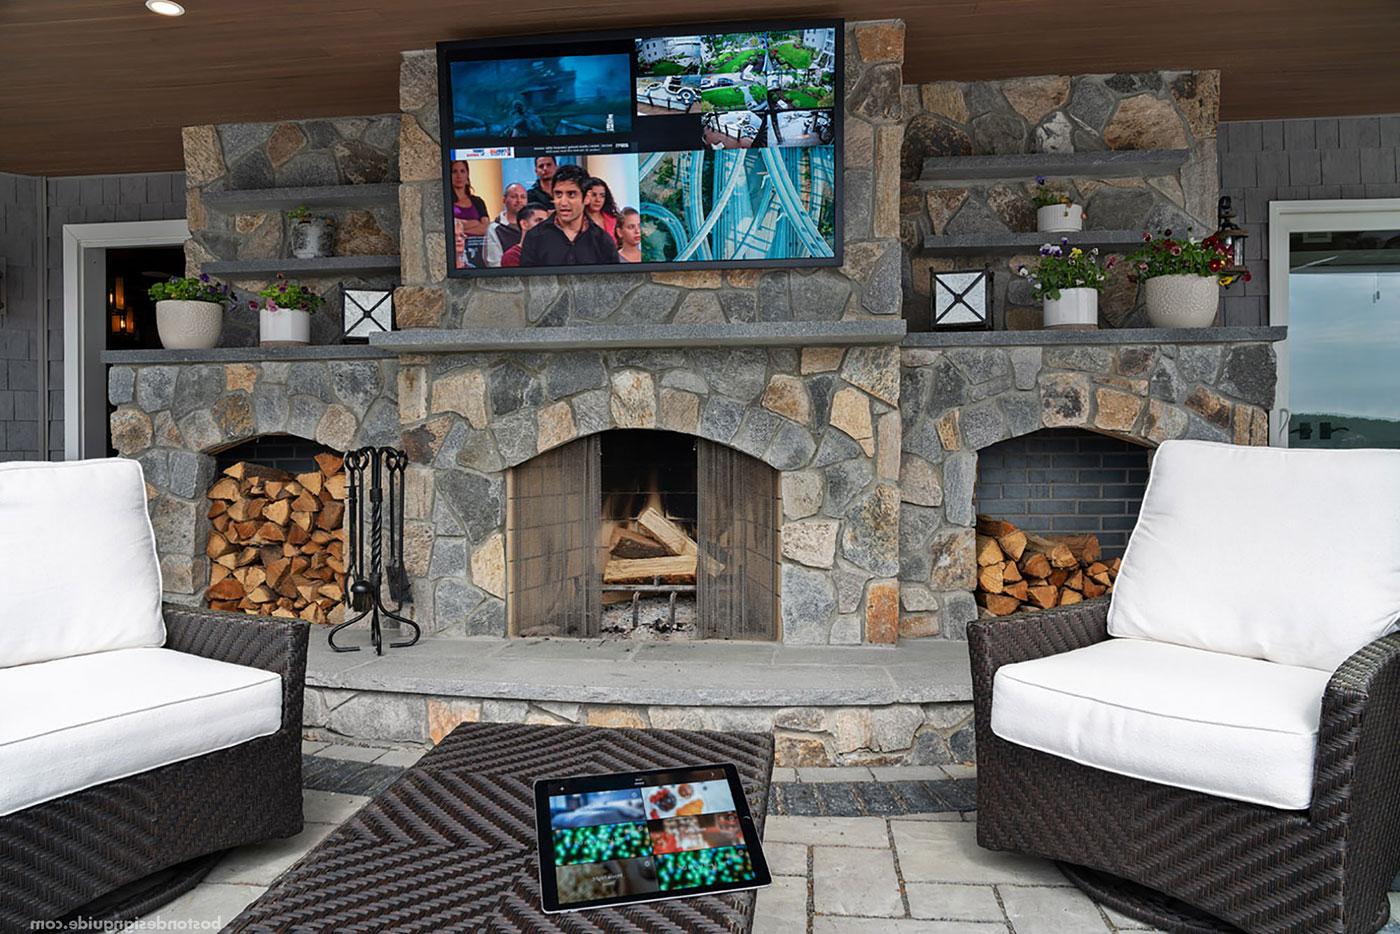 Outdoor living space integrated with smart technology by SDI